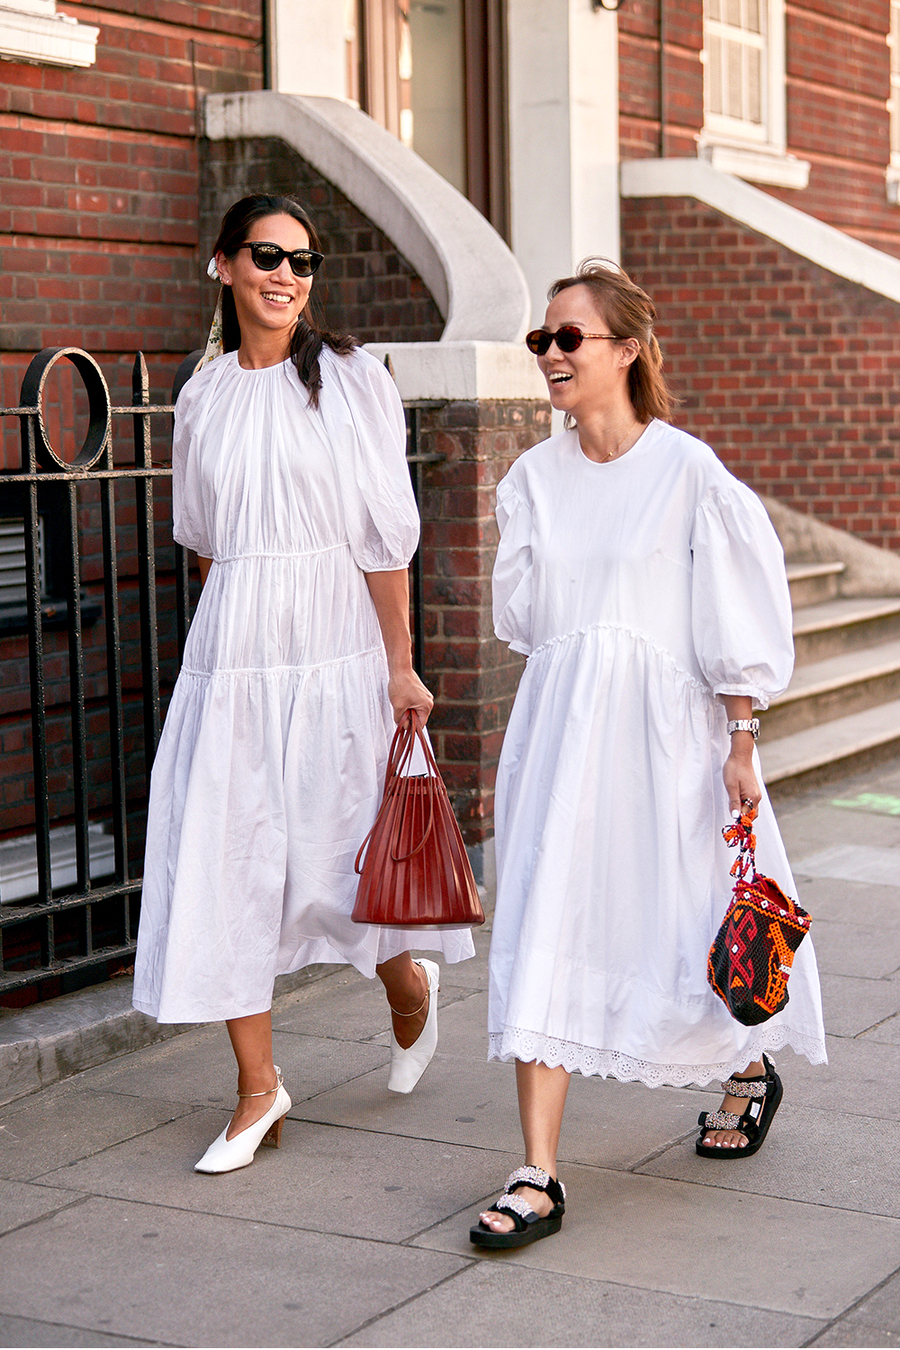 25 Voluminous White Dresses for Spring and Summer — Street style outfit ideas with puffed sleeves and billowy skirt, mini bag, and sandals